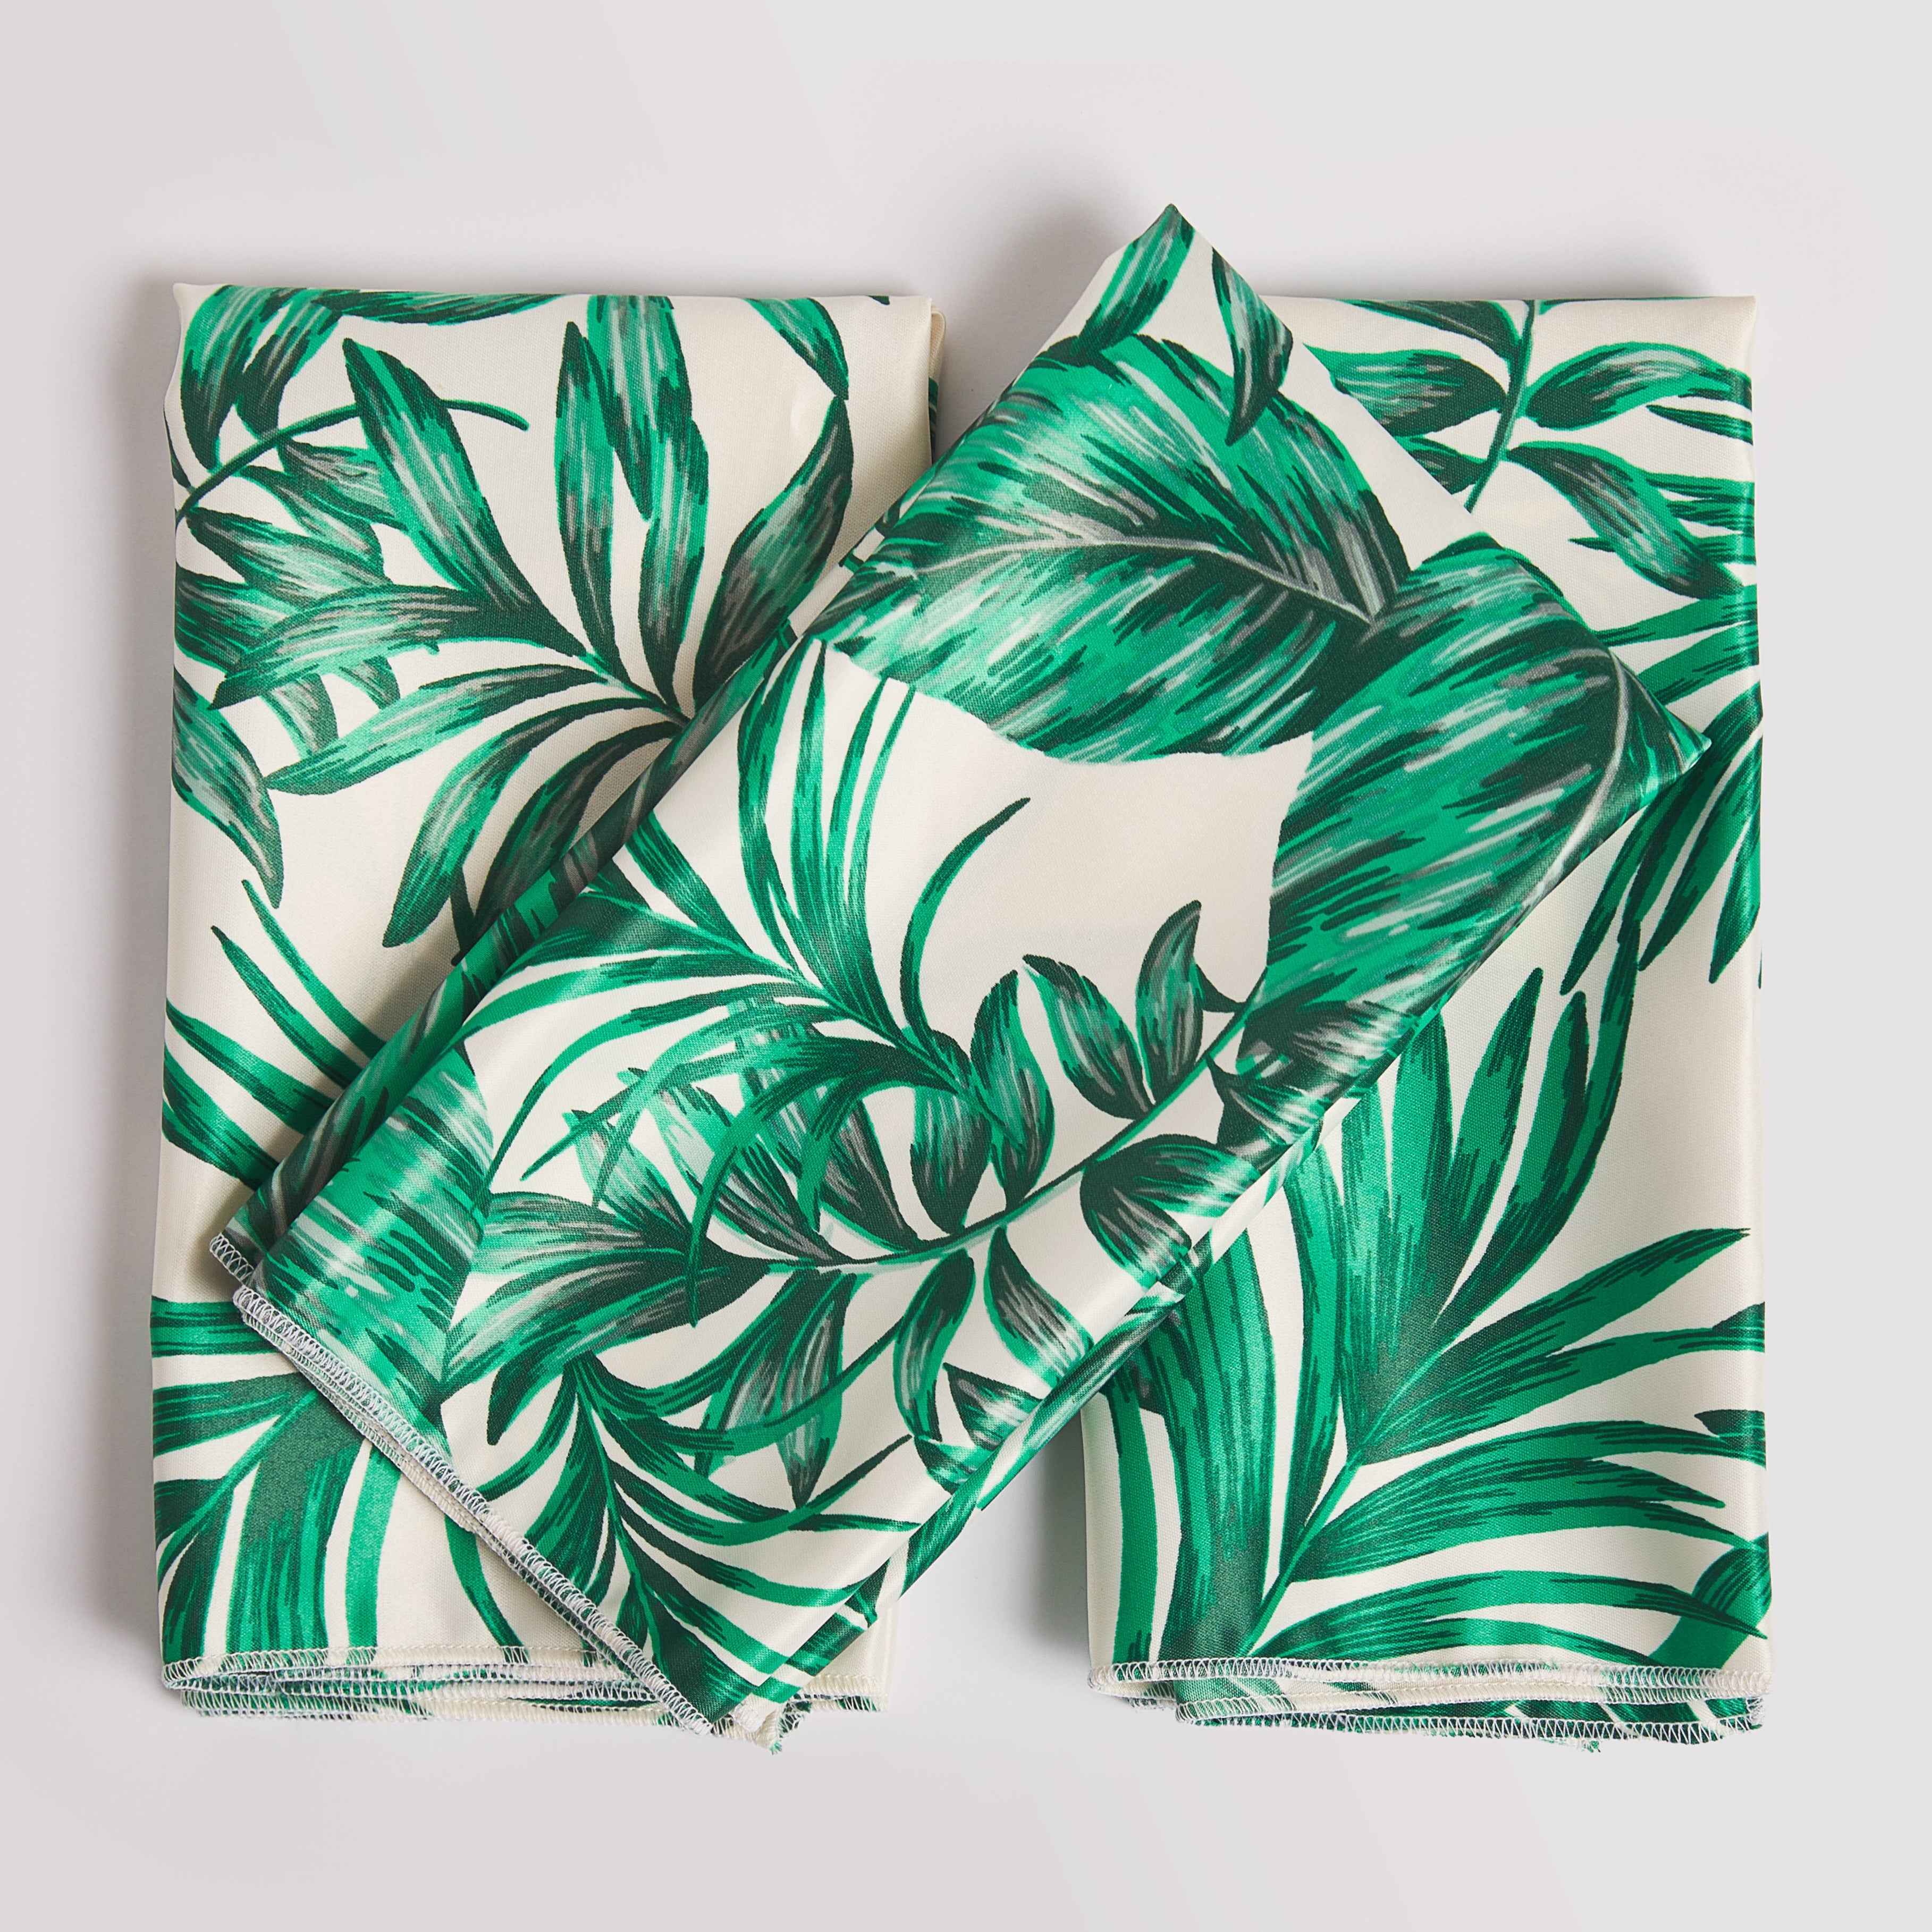 Luxe Leaf Napkin